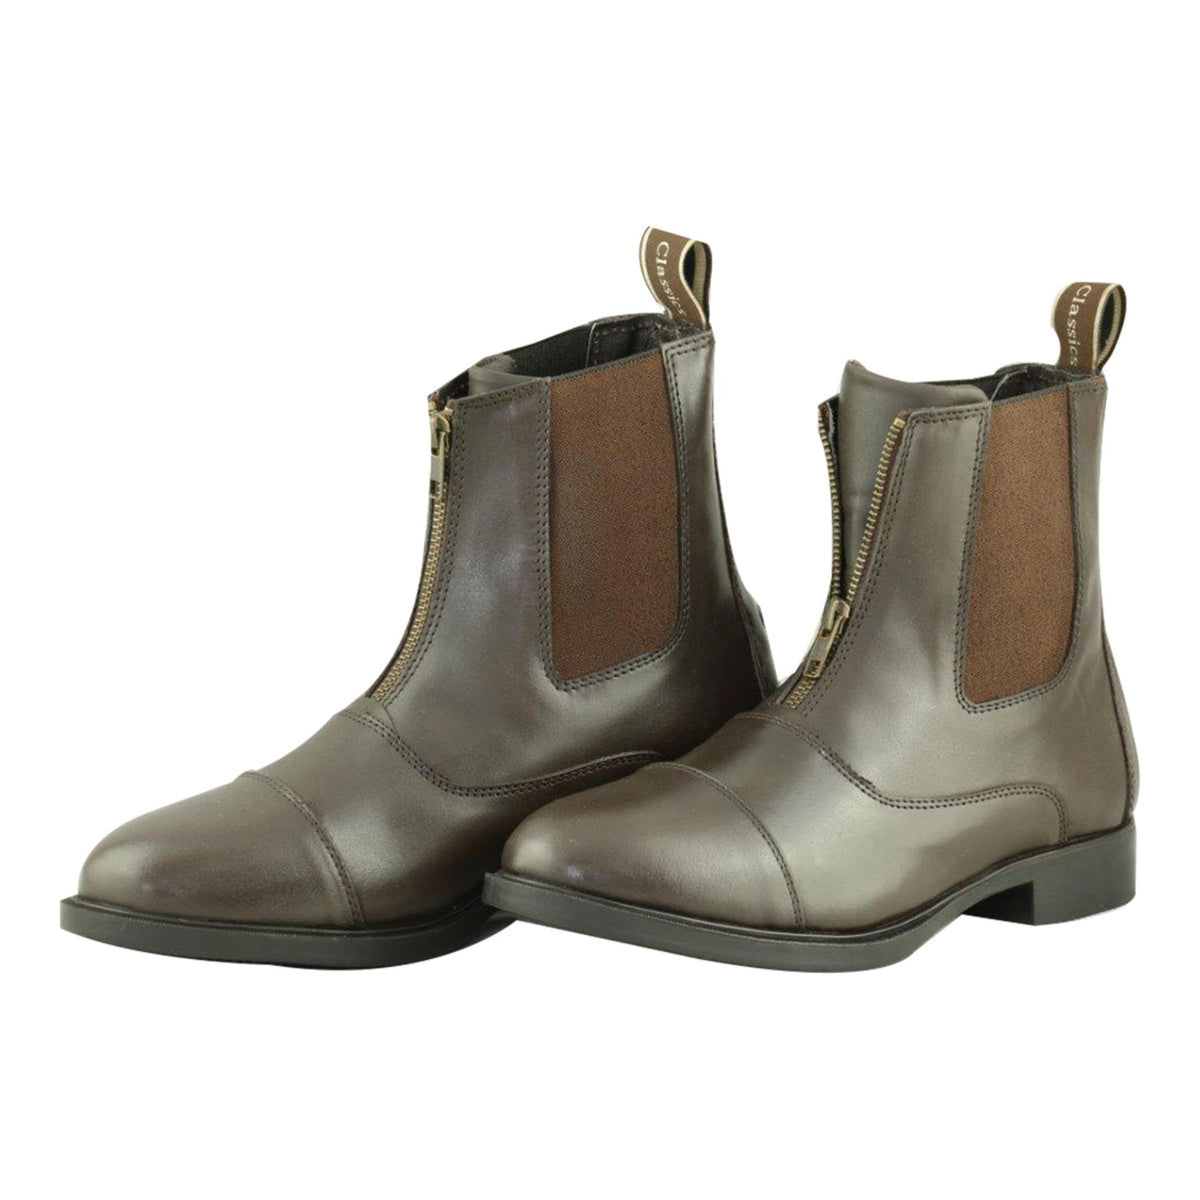 Zip front brown jodhpur boots with pull tabs at back.